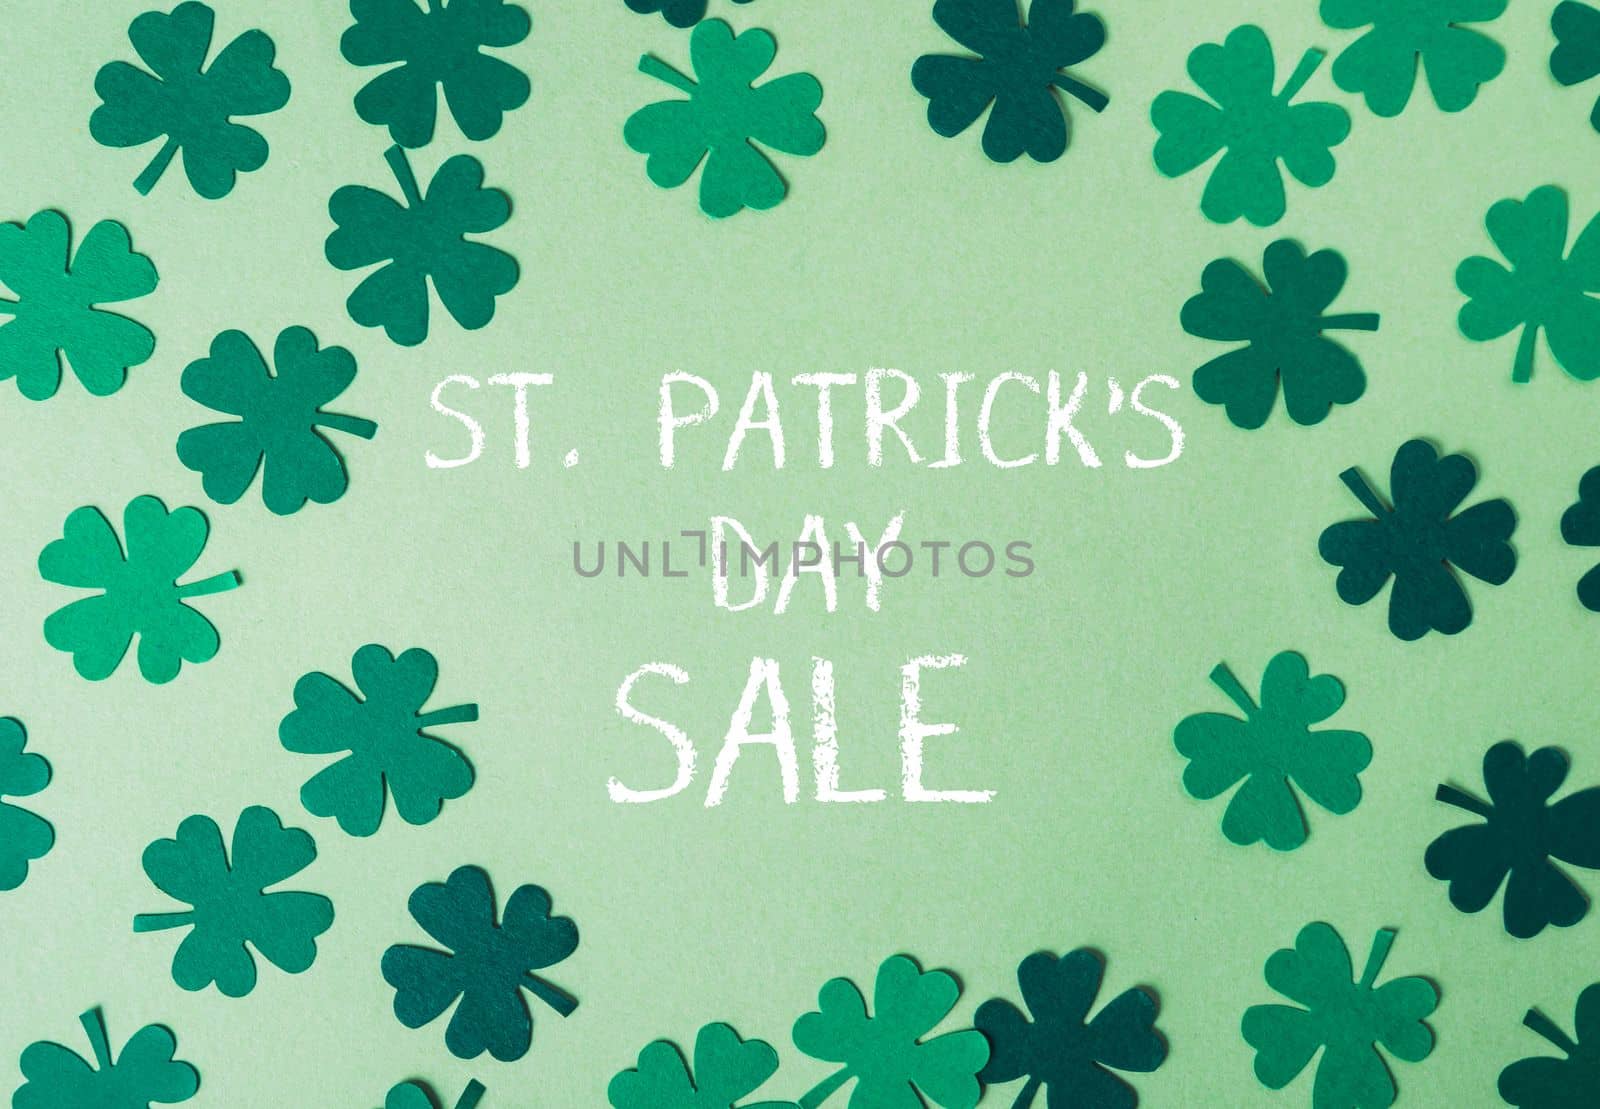 St.Patrick's day sale with a background of clover leaves by Alla_Morozova93